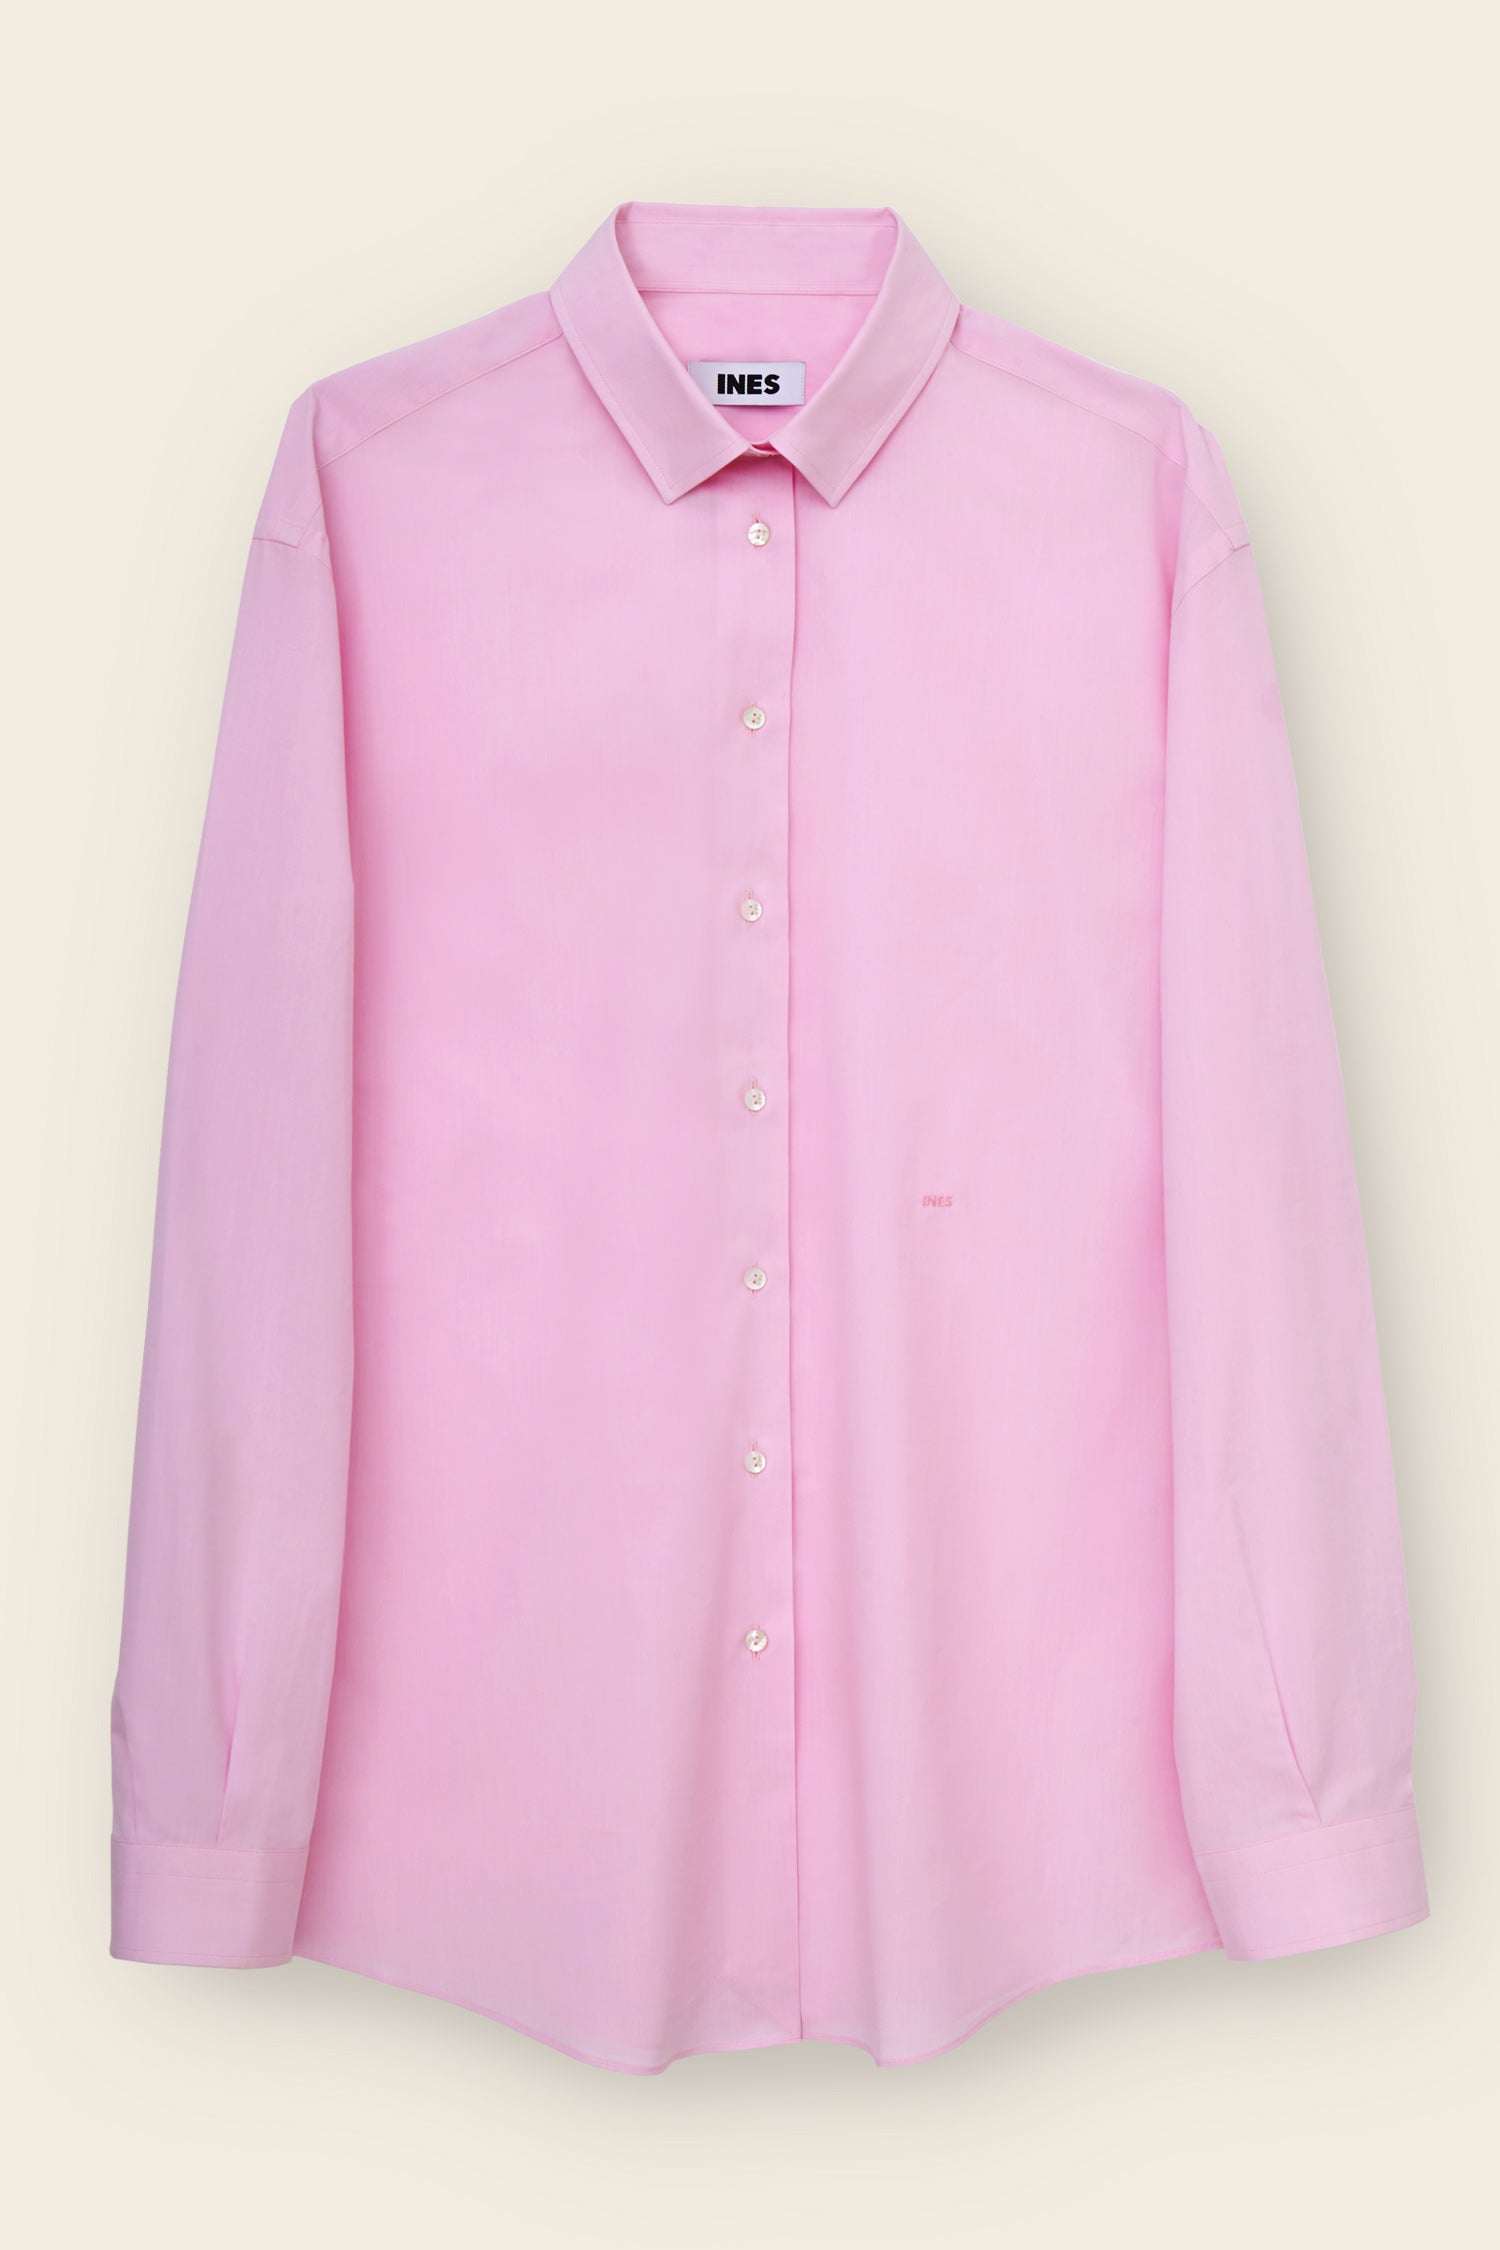 Oversized Classic Shirt in super soft cotton- PINK edition